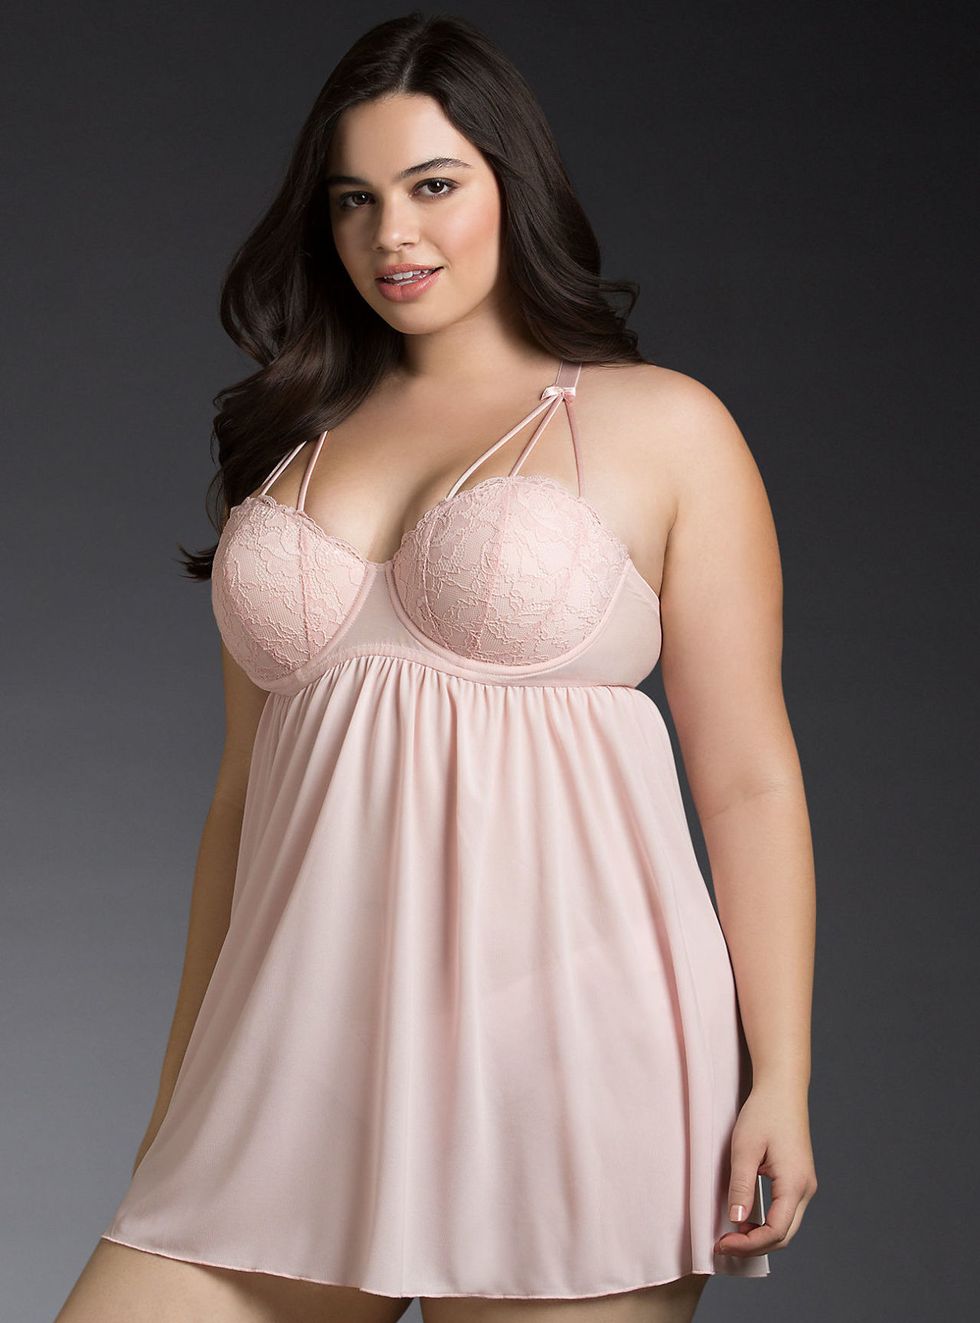 15 Sexy Pieces of Plus-Size Lingerie - Plus Size Bras, Corsets and Underwear